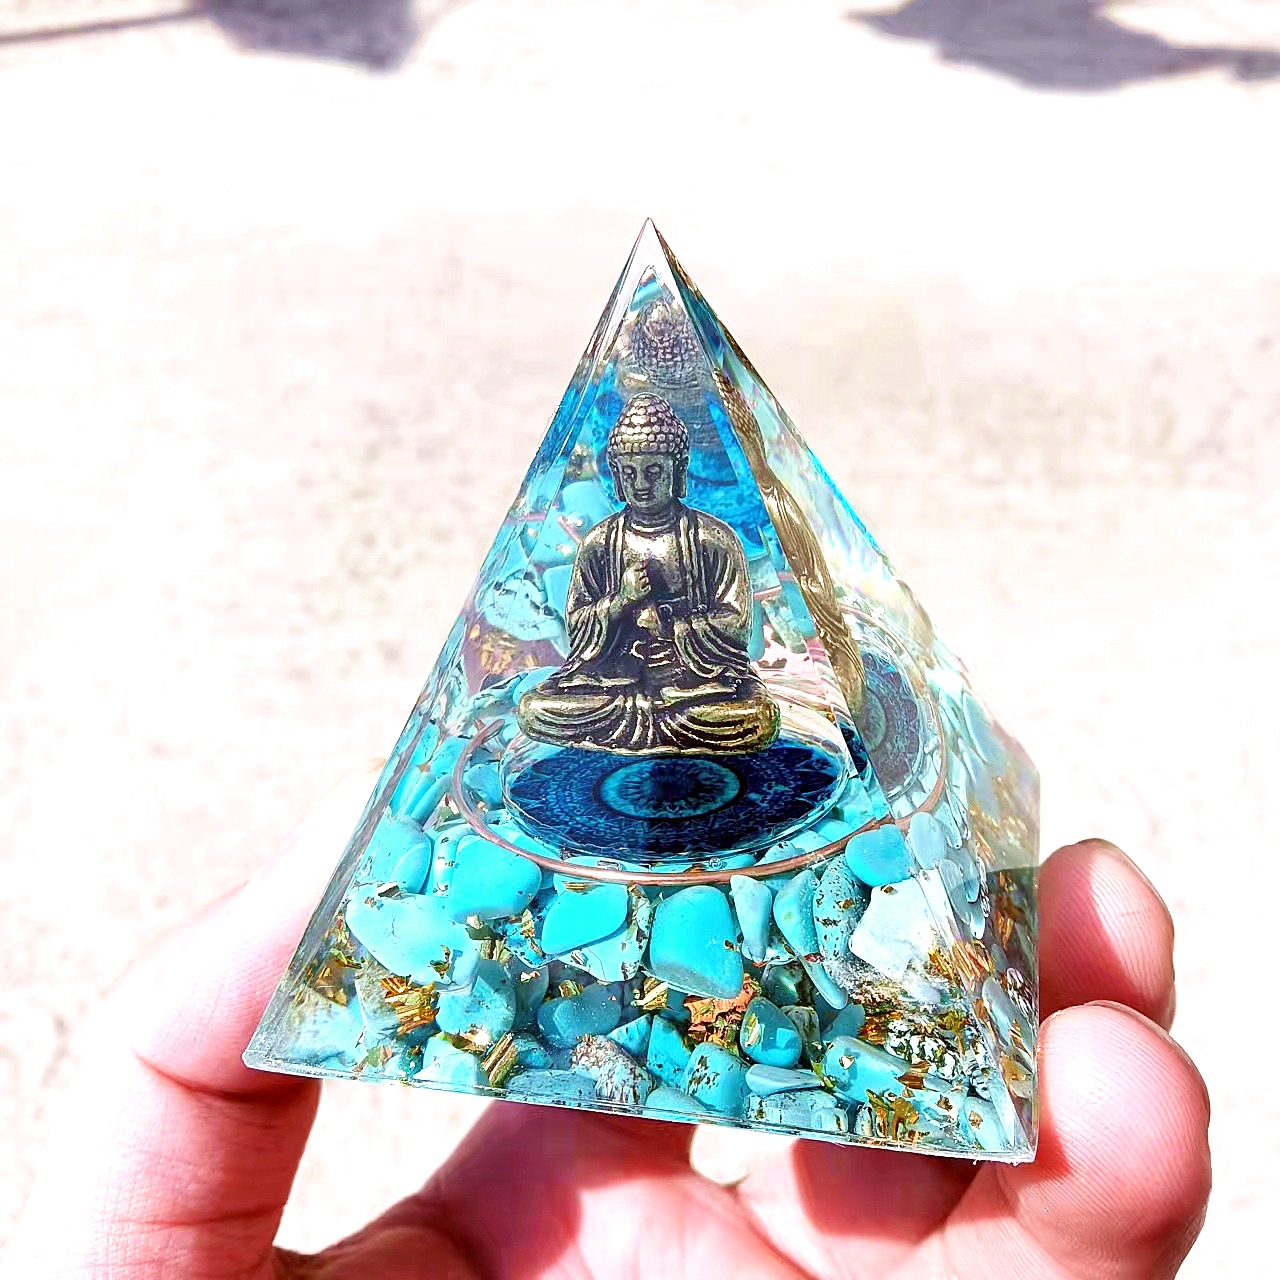 Orgonite is based on two principles. It is a mix of resin (organic, as it is based on petrochemicals), and metal shavings (inorganic). A quartz crystal is also added because of its piezoelectric properties, which means that it gives off a charge when it is put under pressure (resin shrinks when it is cured, so constant pressure is put on the quartz crystal).